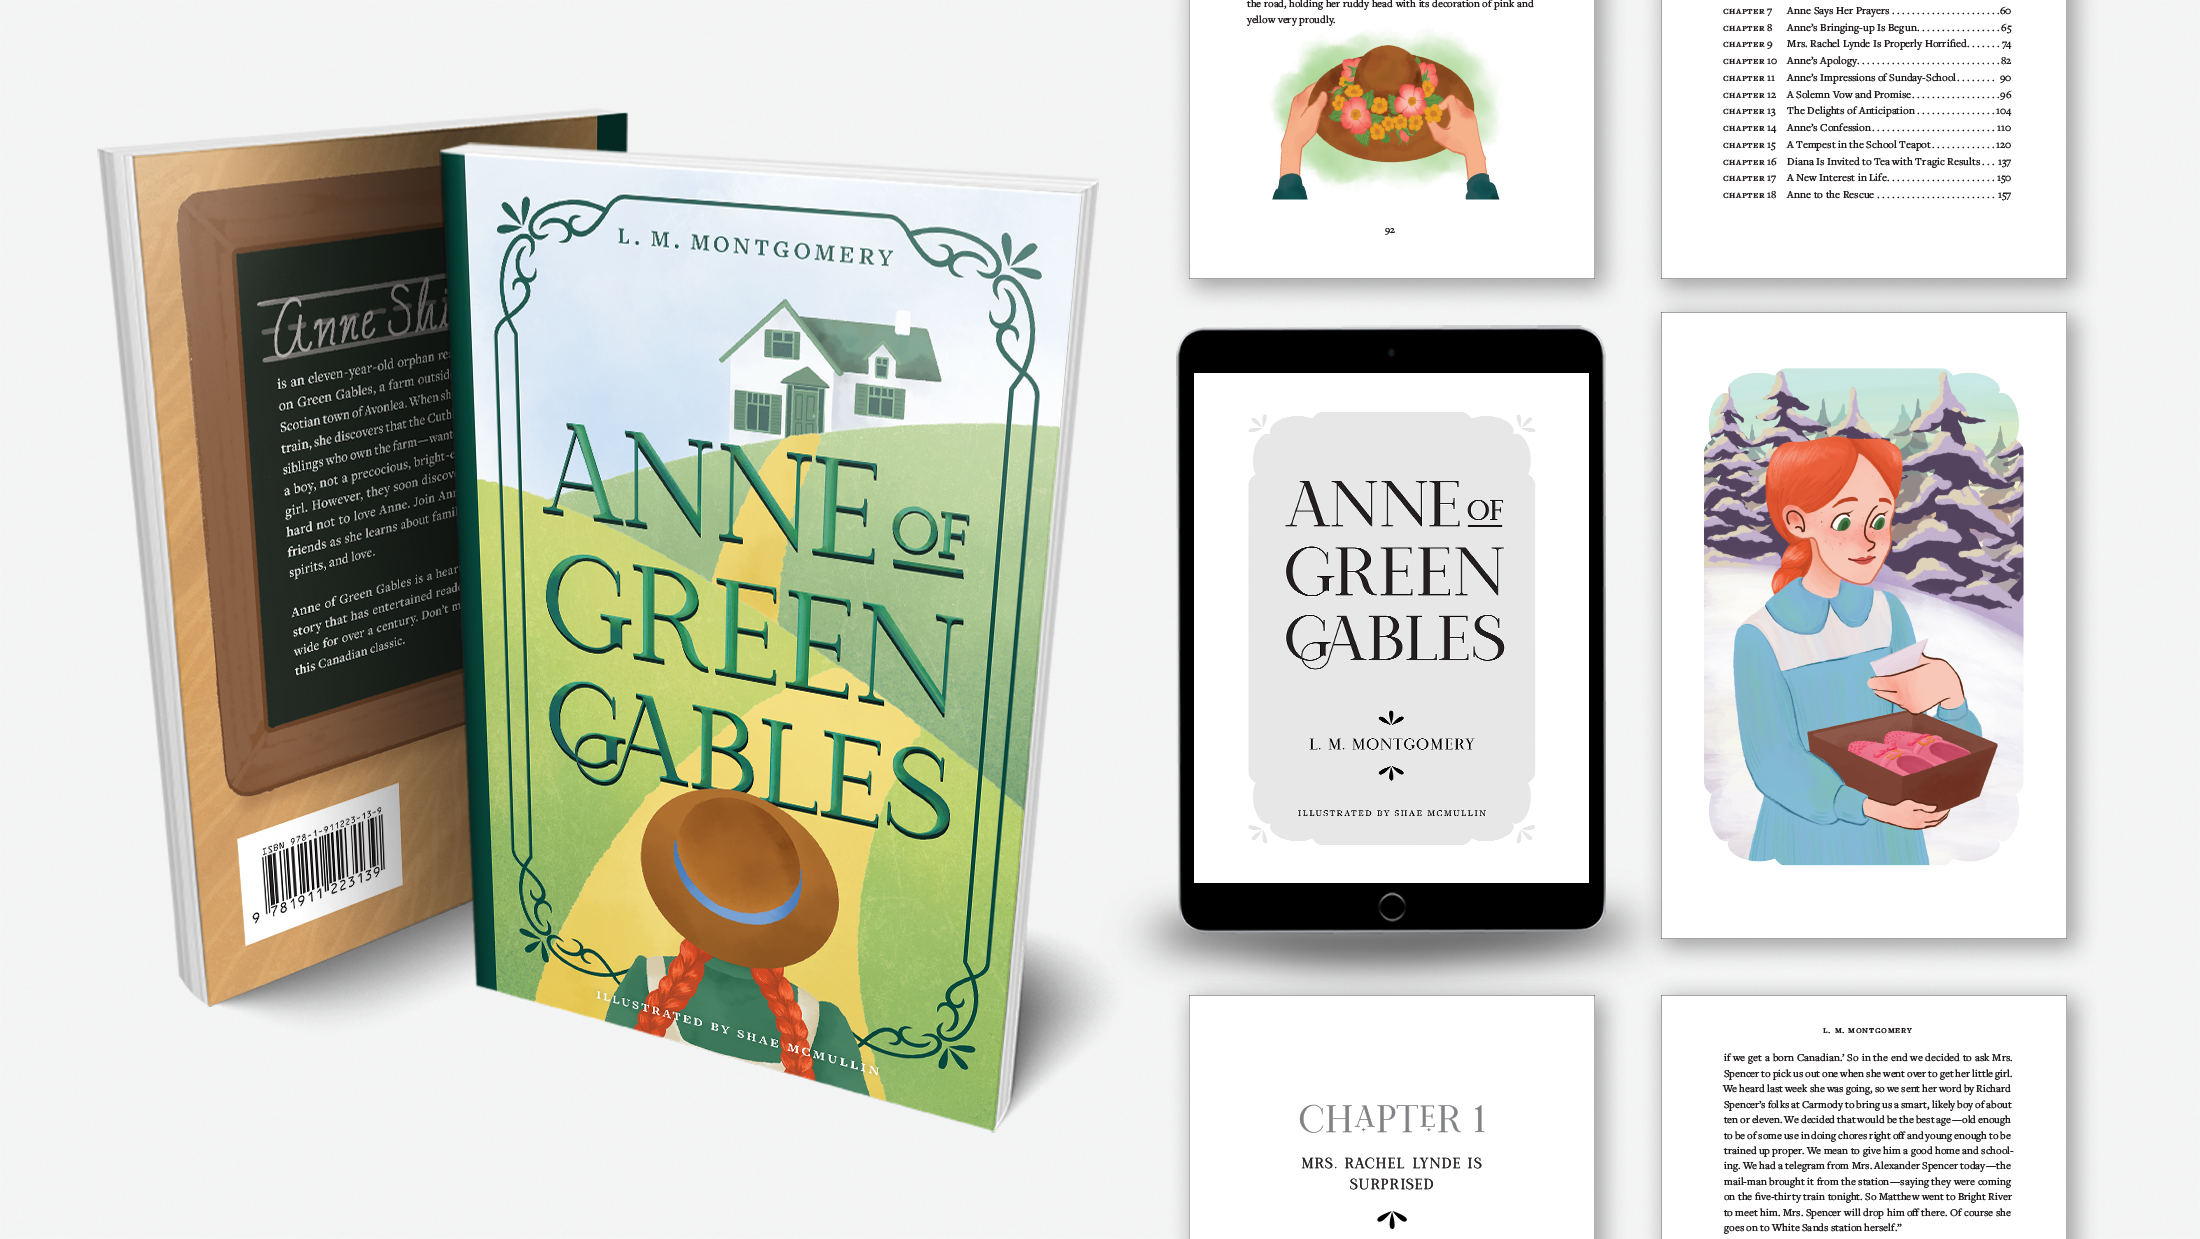 Anne of Green Gables EBook Research Project 1